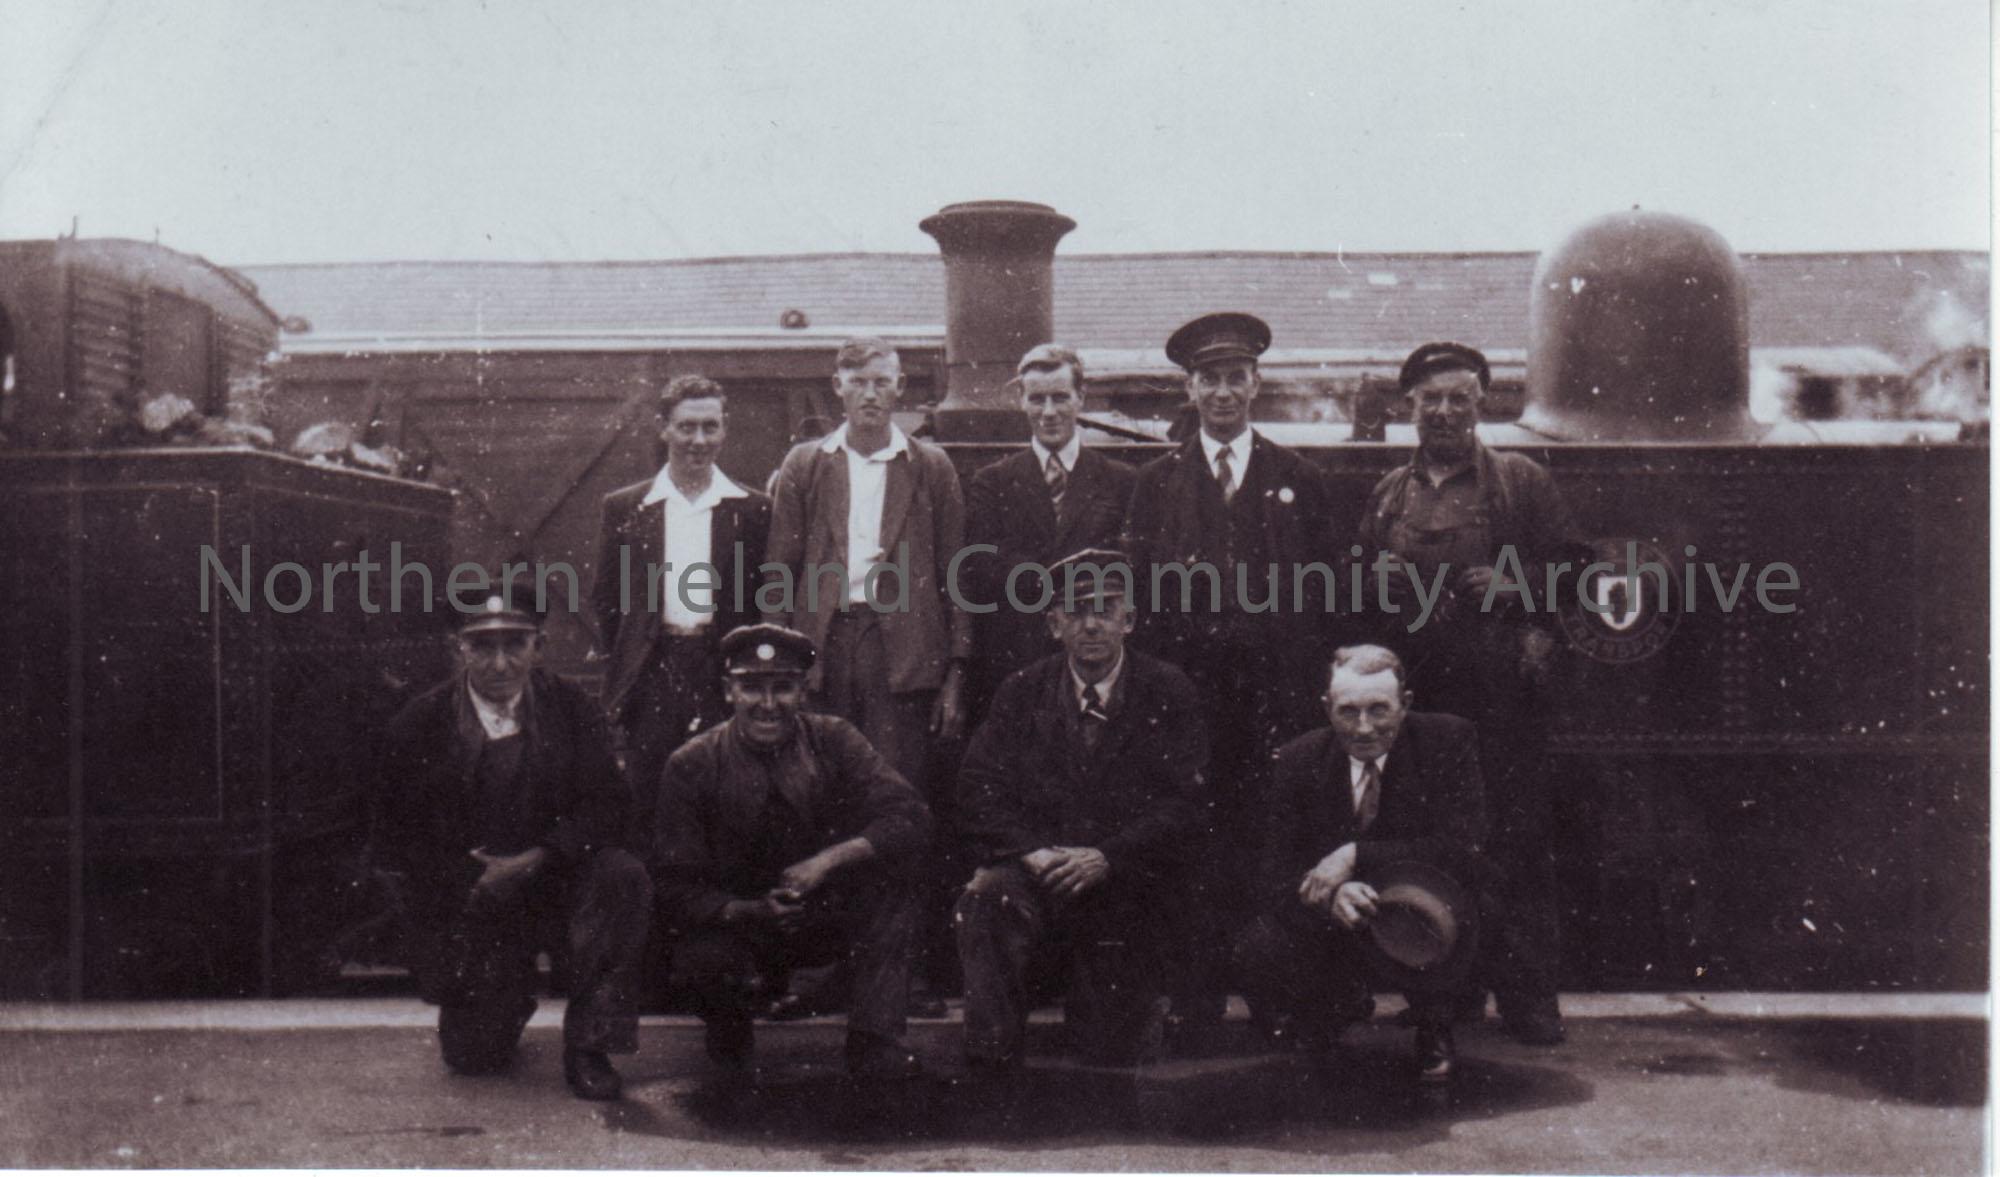 Engine Crews photographed on Last Day of the Ballycastle Railway. The last train ran on 2nd July, 1950